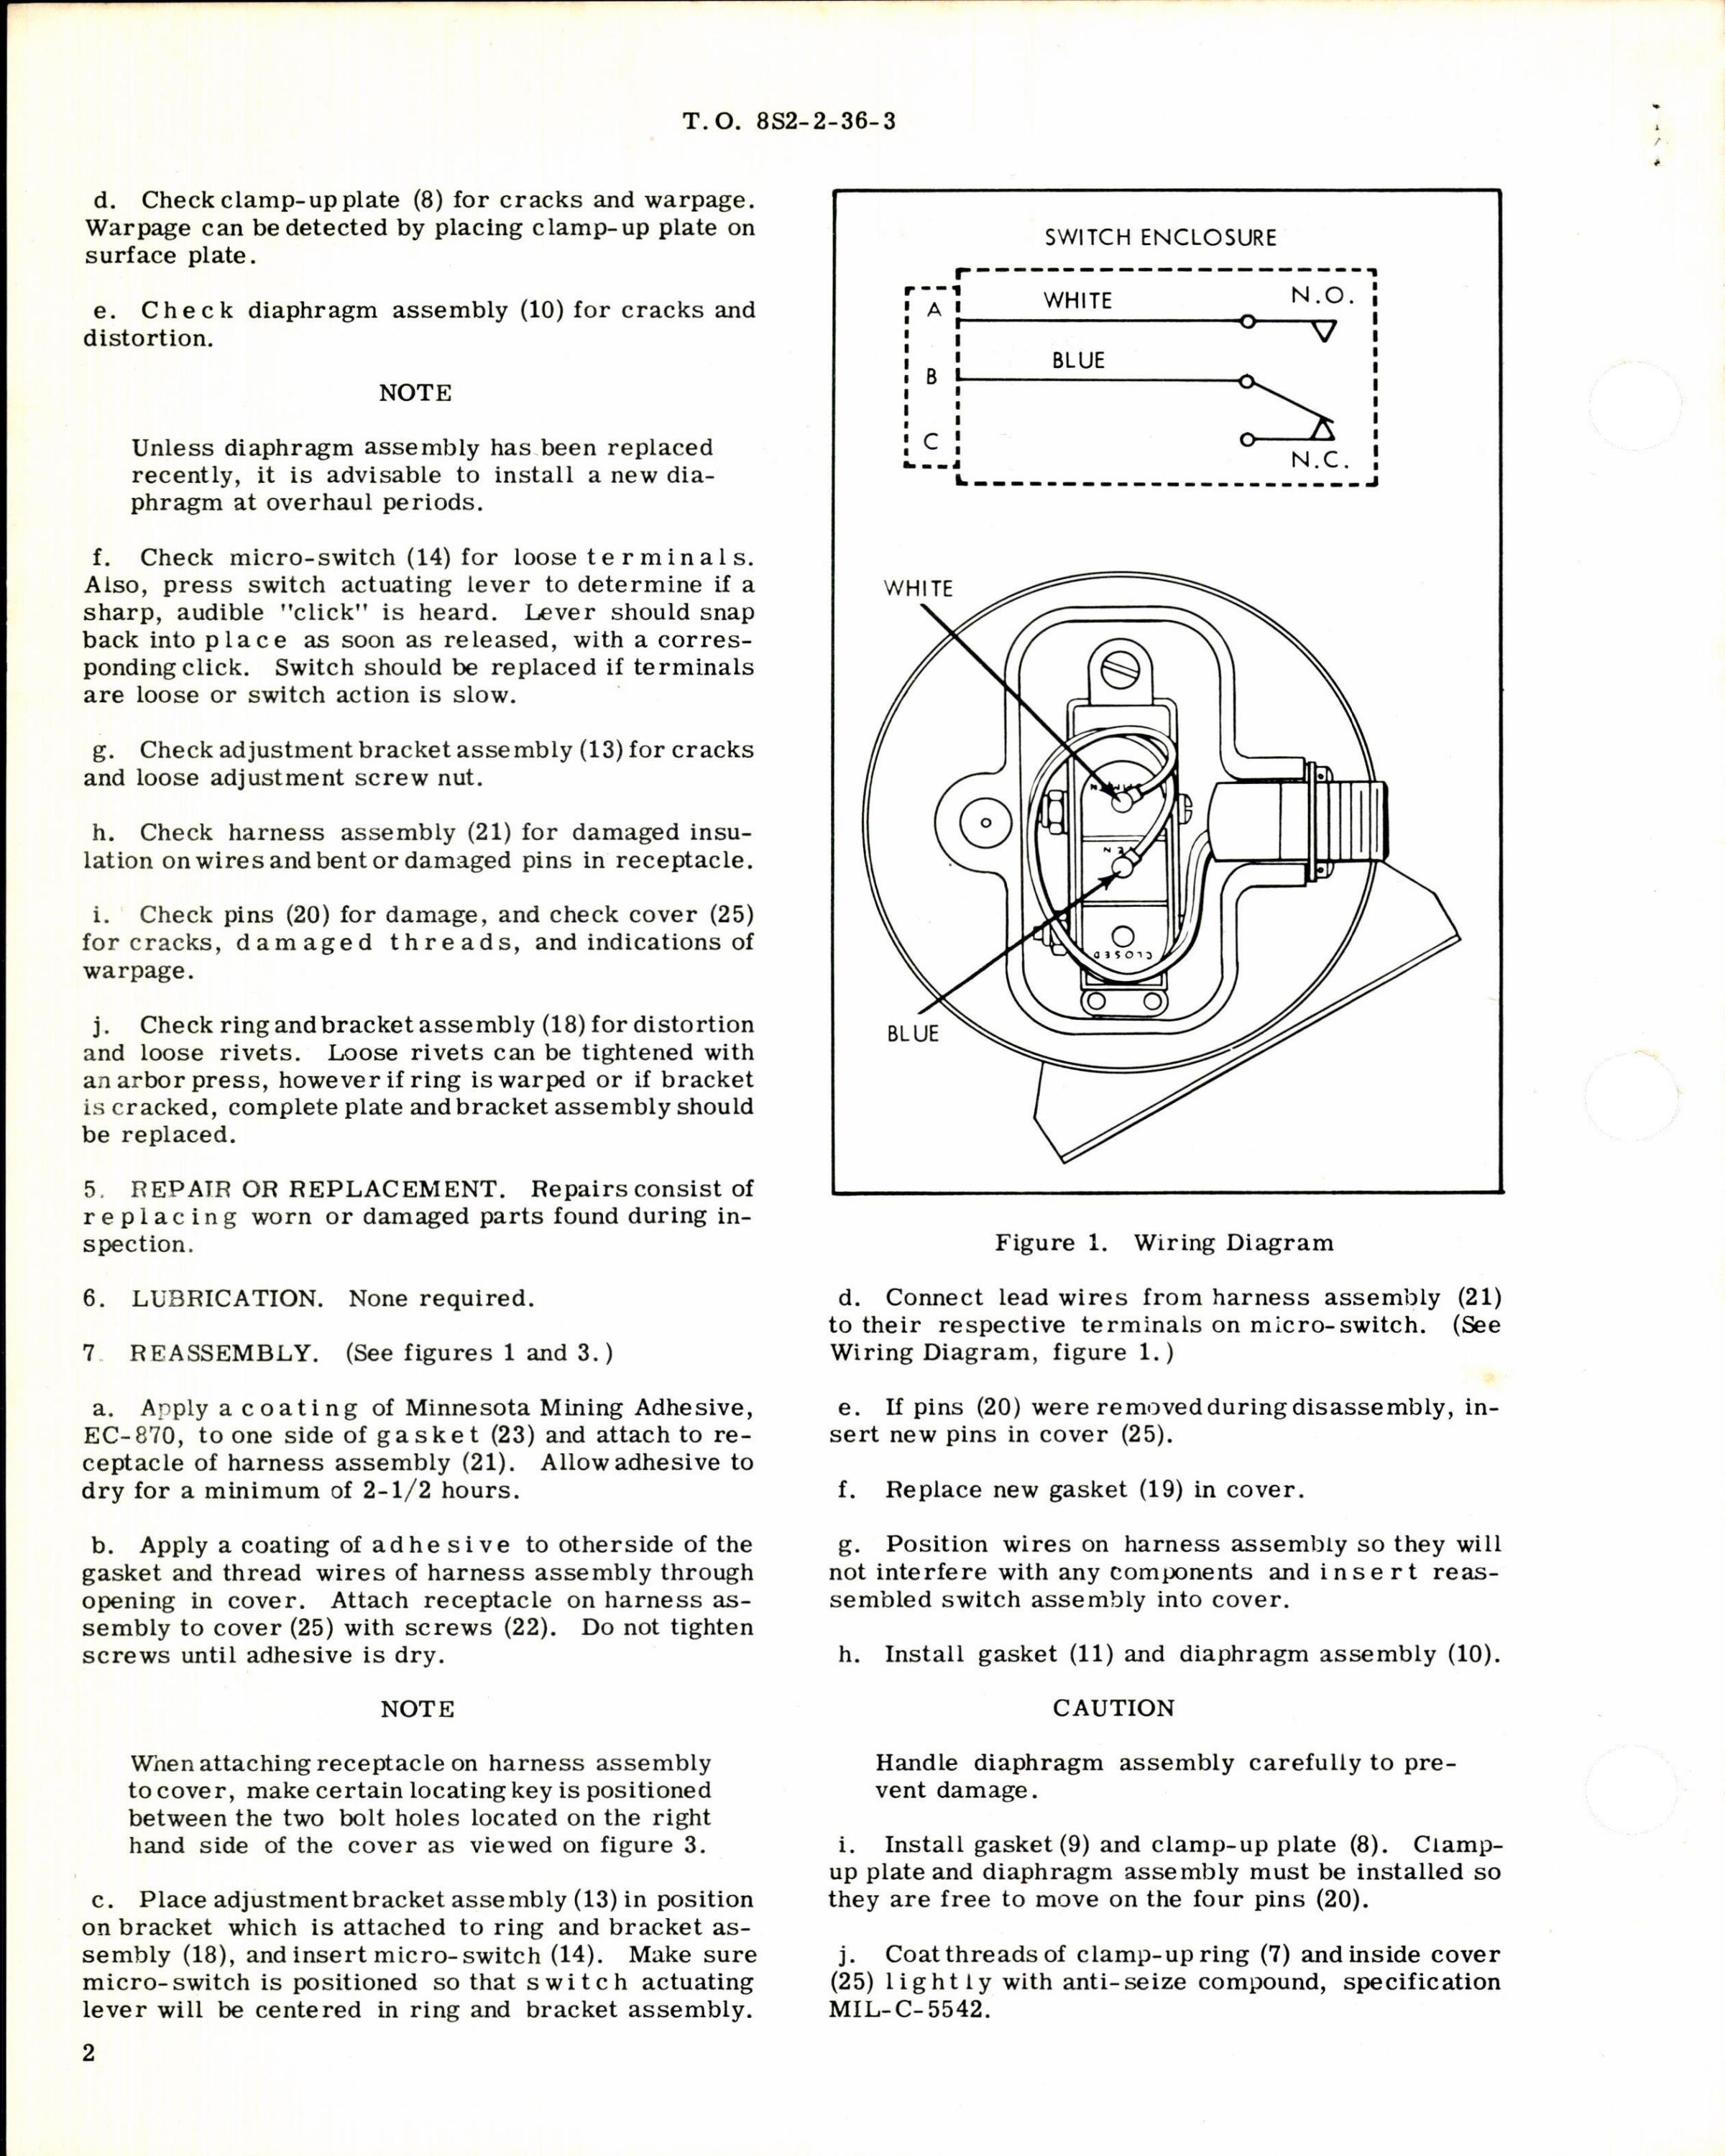 Sample page 2 from AirCorps Library document: Differential Pressure Switch 69000-3